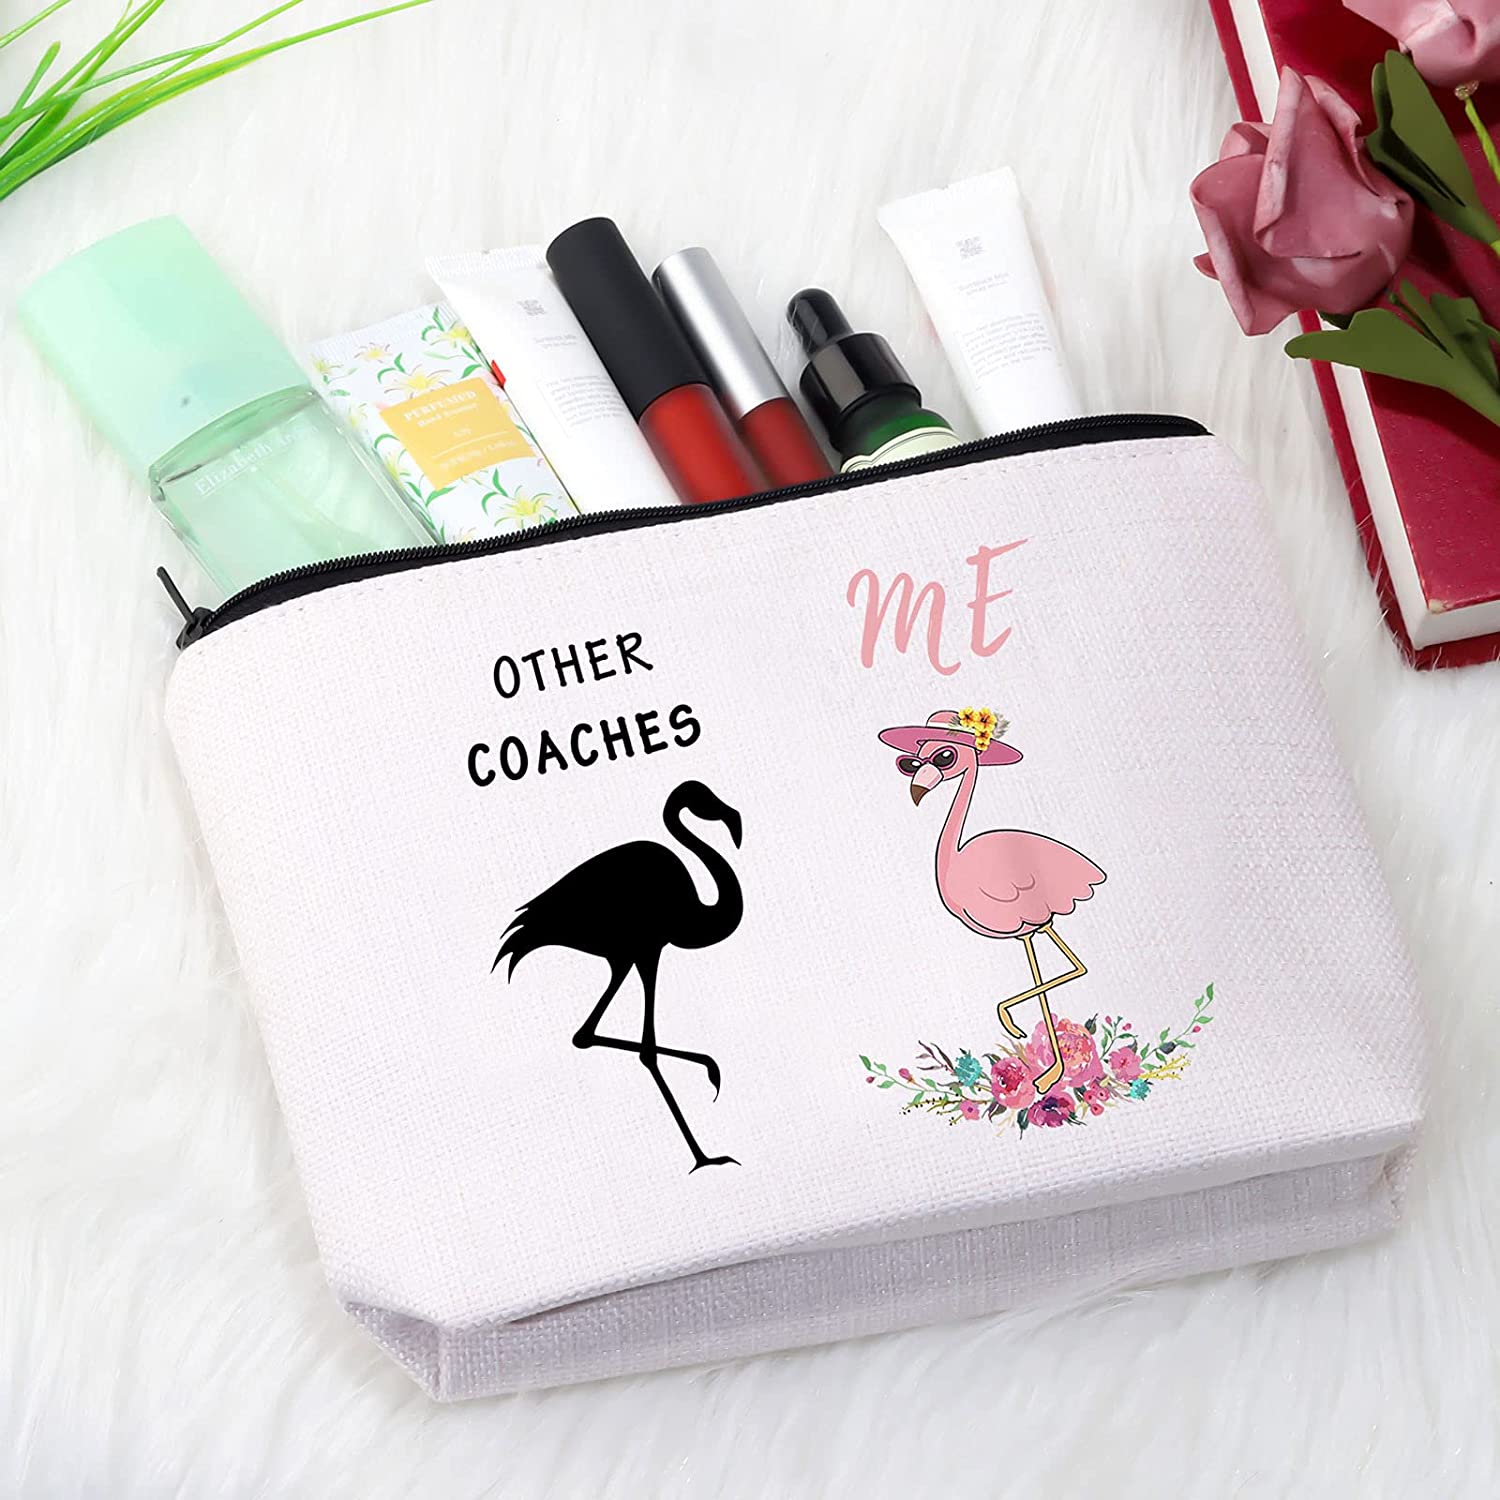 Coaches Gift for Women Other Coaches Me Football Baseball Cheer Coaches Zipper Pouch Cosmetic Makeup Bag Coaches Birthday Gift - image 4 of 5